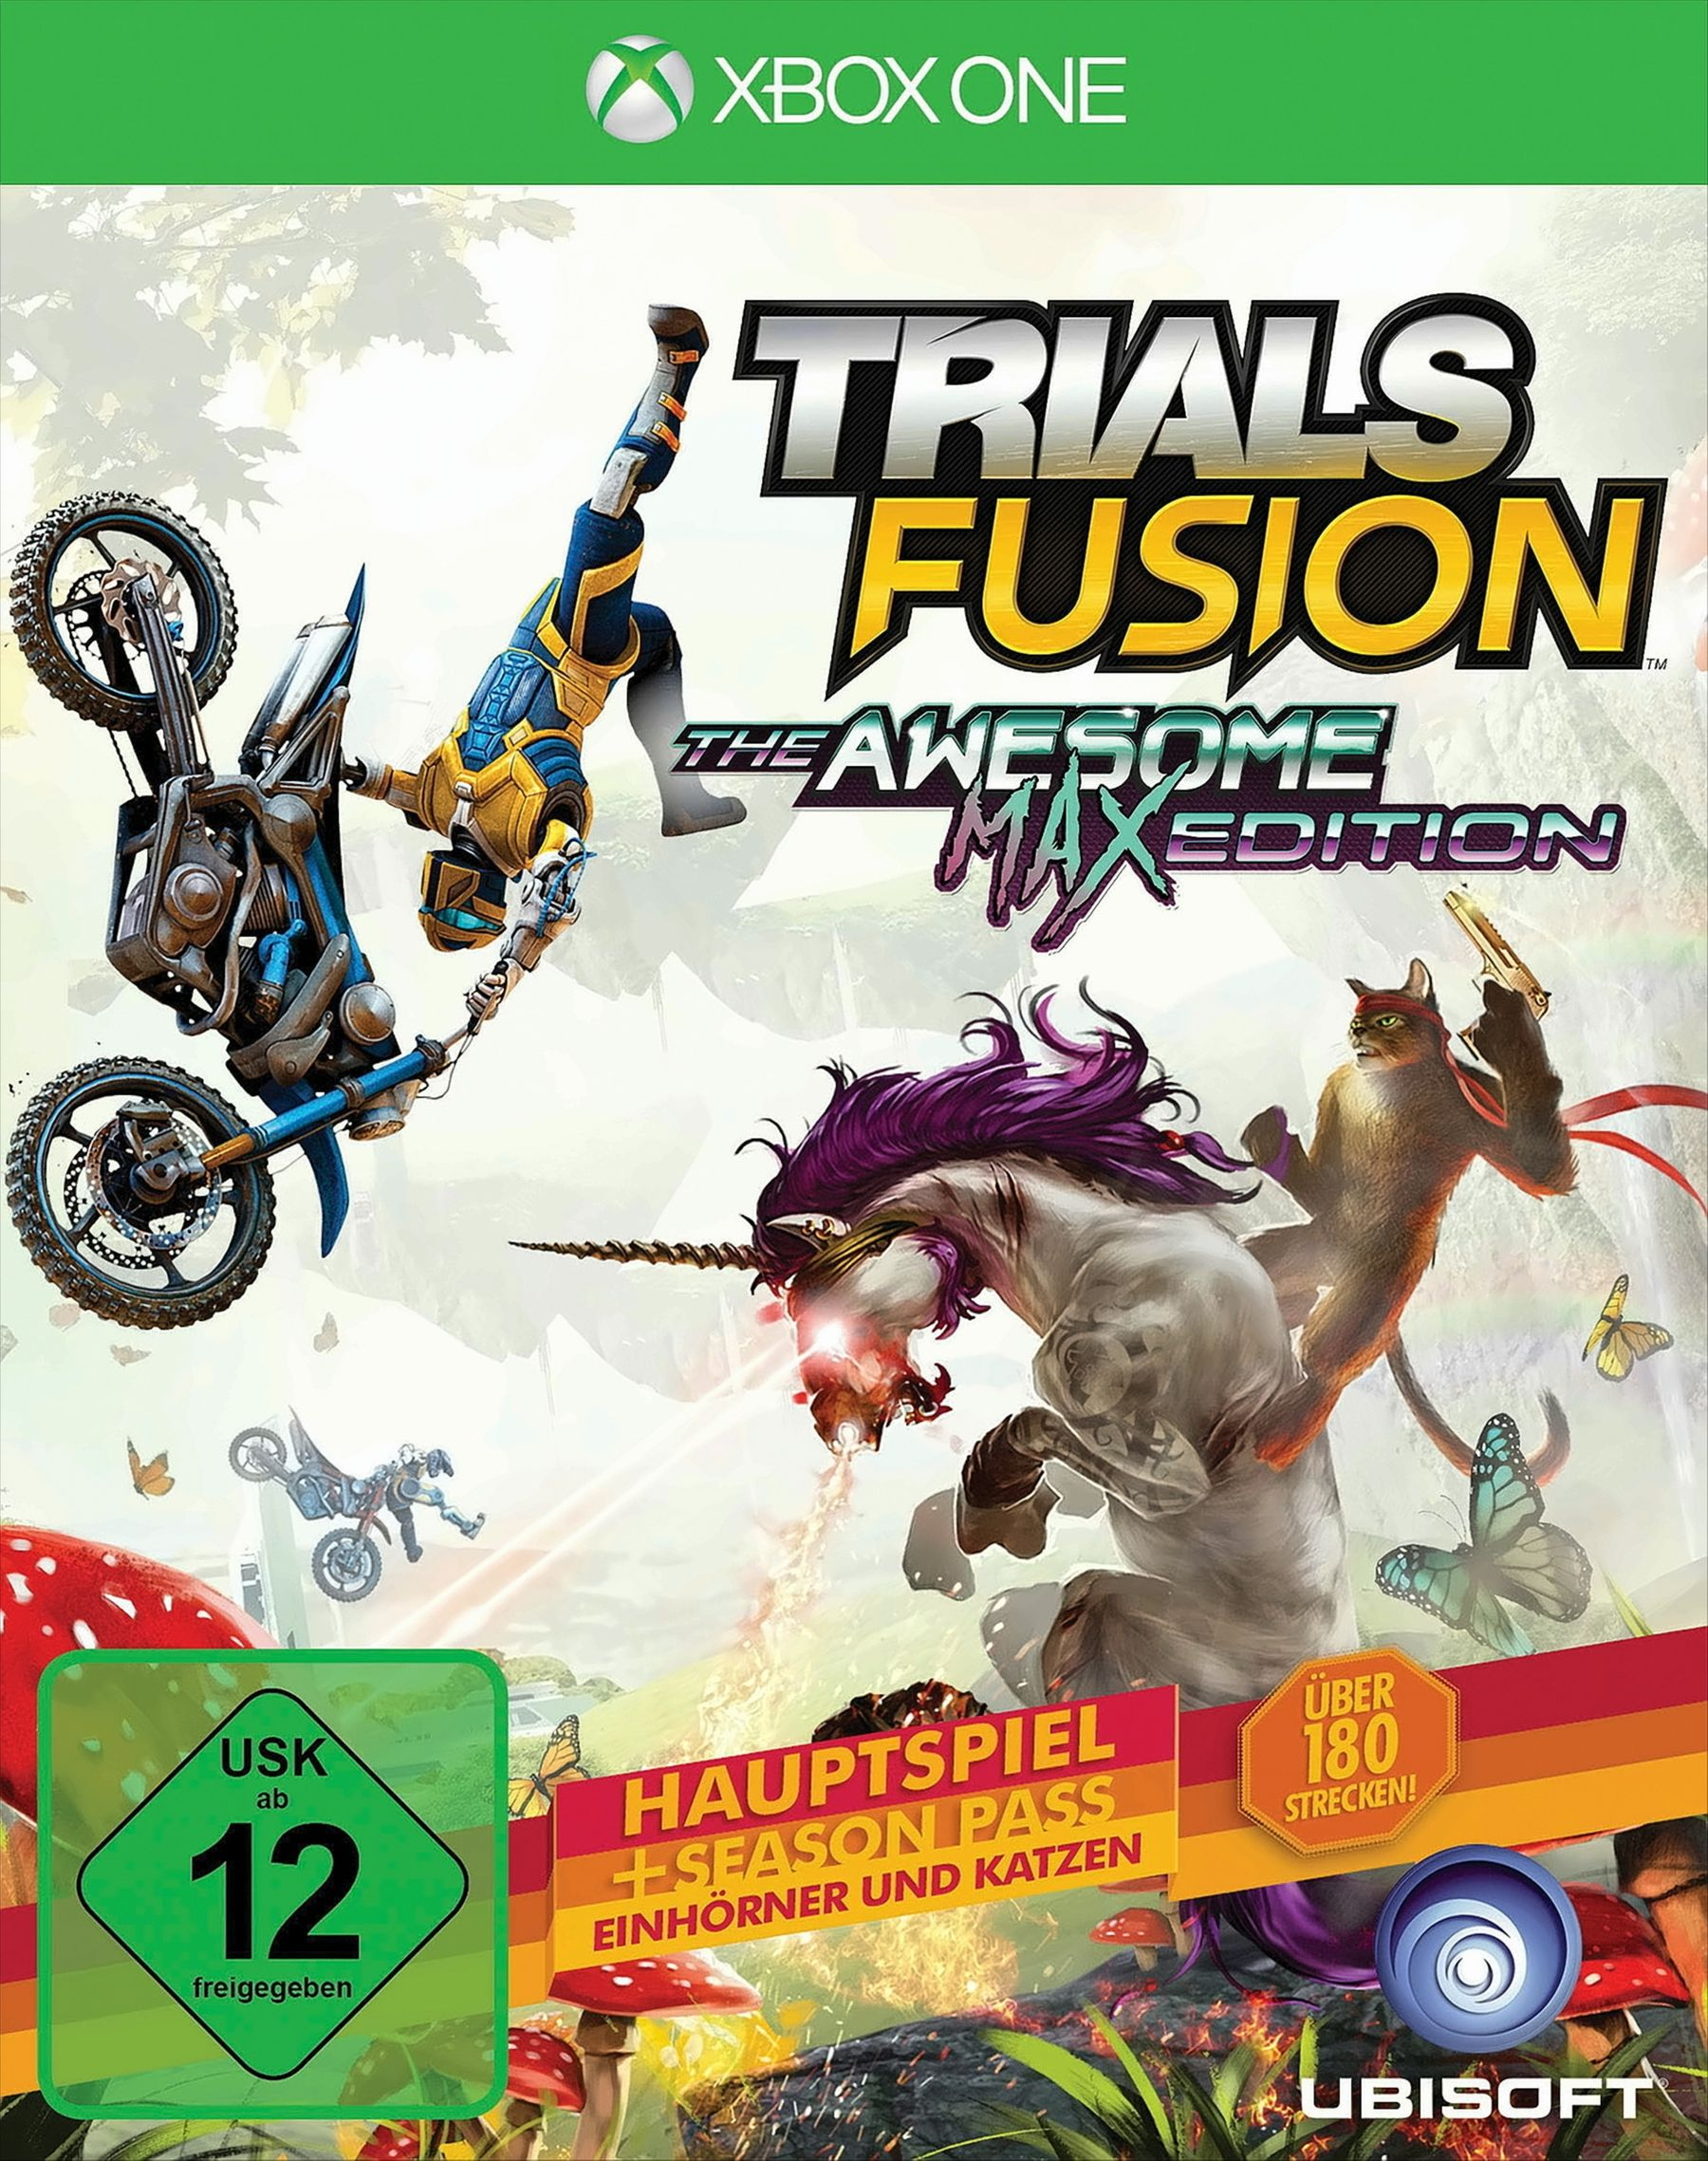 Awesome Edition Fusion Max Trials [Xbox - The - One]